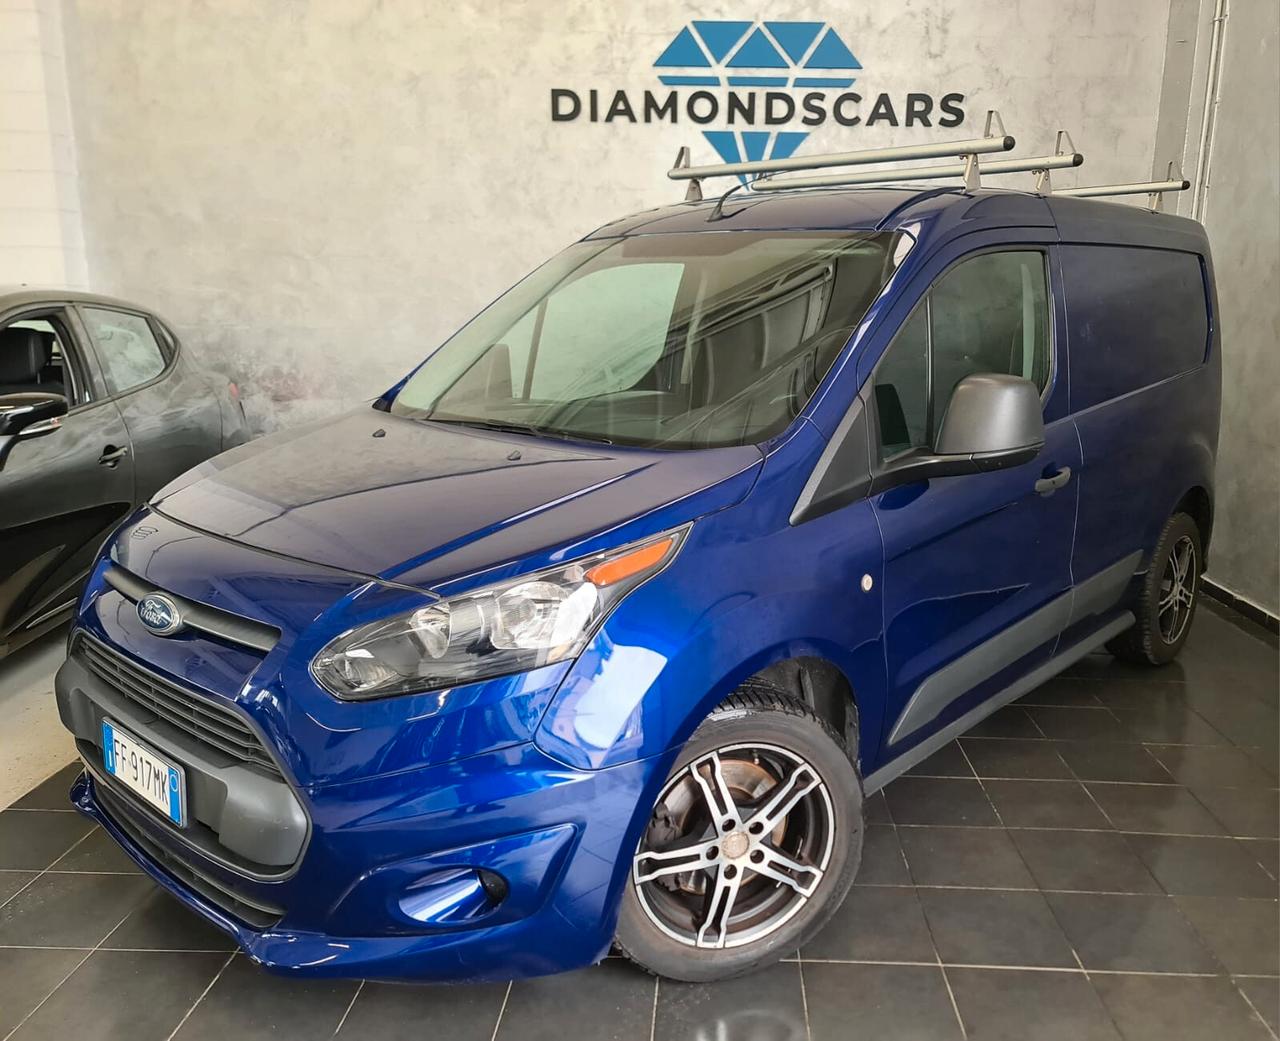 FORD TRANSIT CONNECT 1.5 TDCI